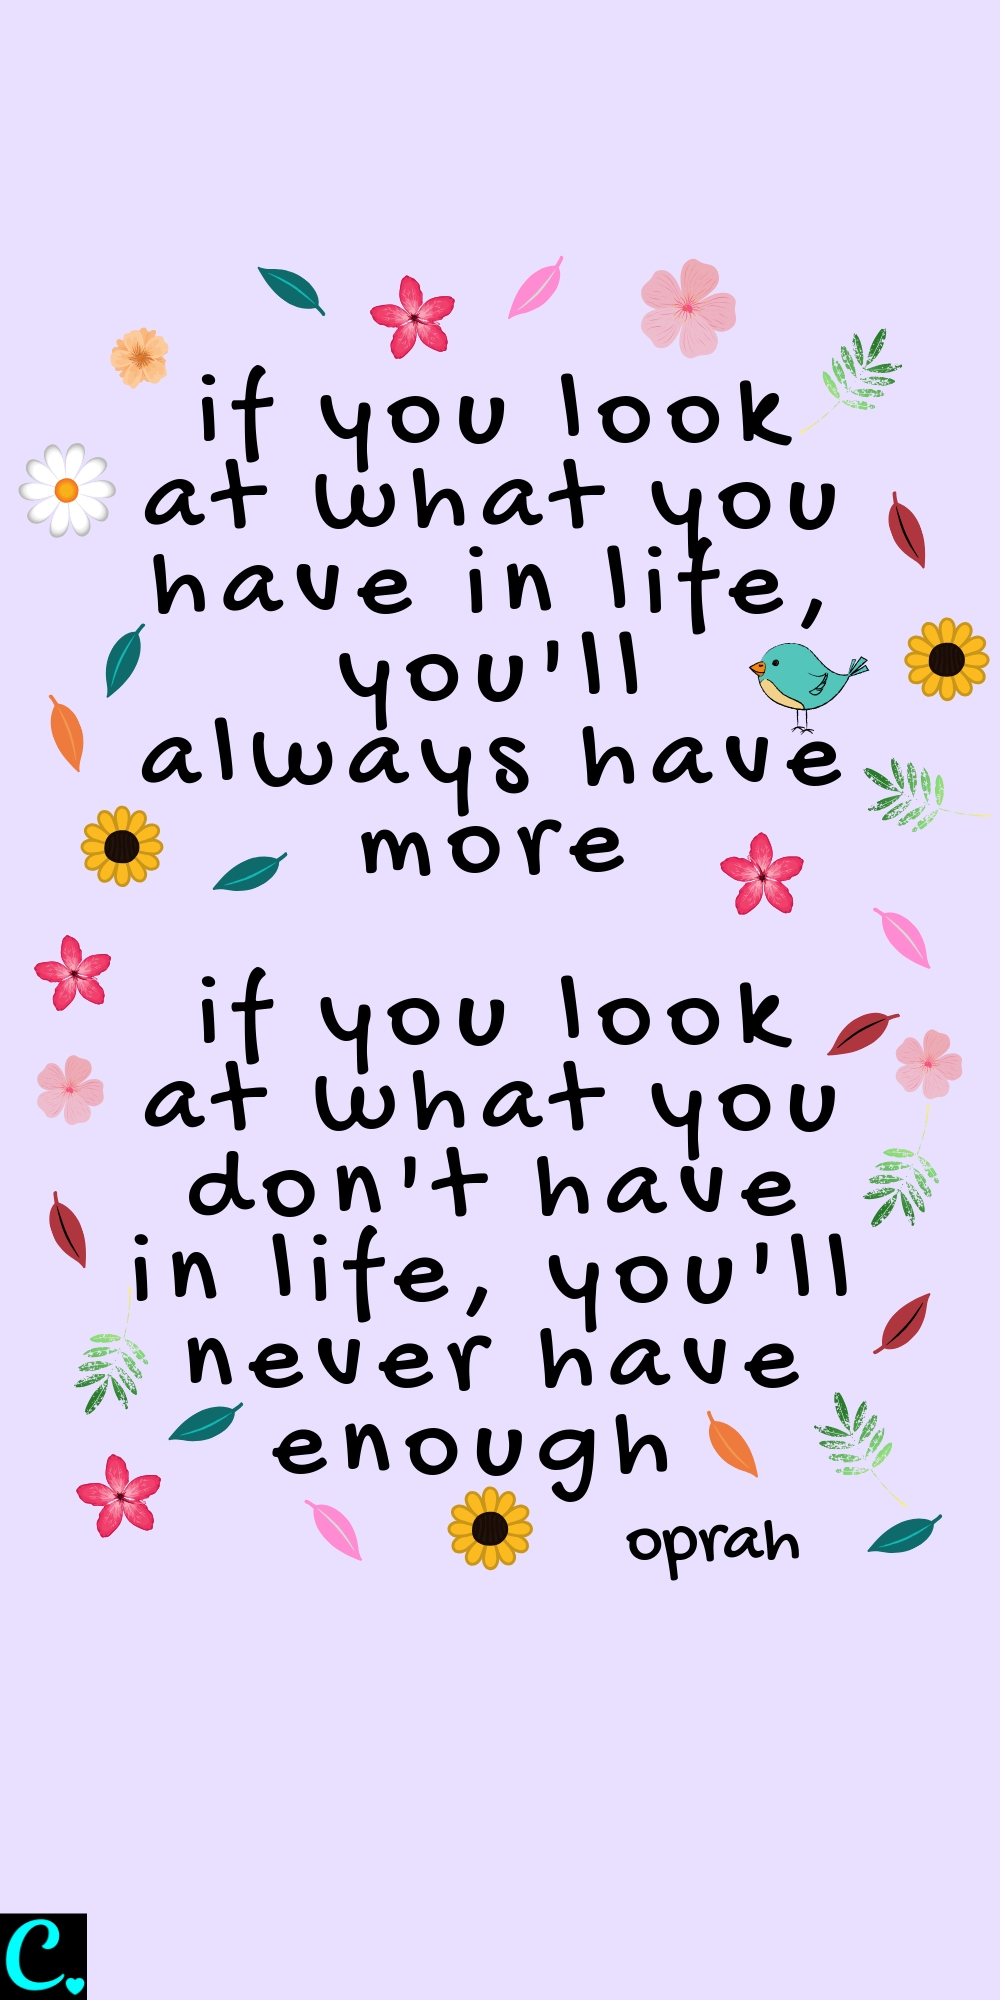 If you look at what you have in life you'll always have more... if you look at what you don't have in life you'll never have enough | Oprah Quote | Appreciation quote | #appreciationquote #lawofattractionquotes #oprahquotes